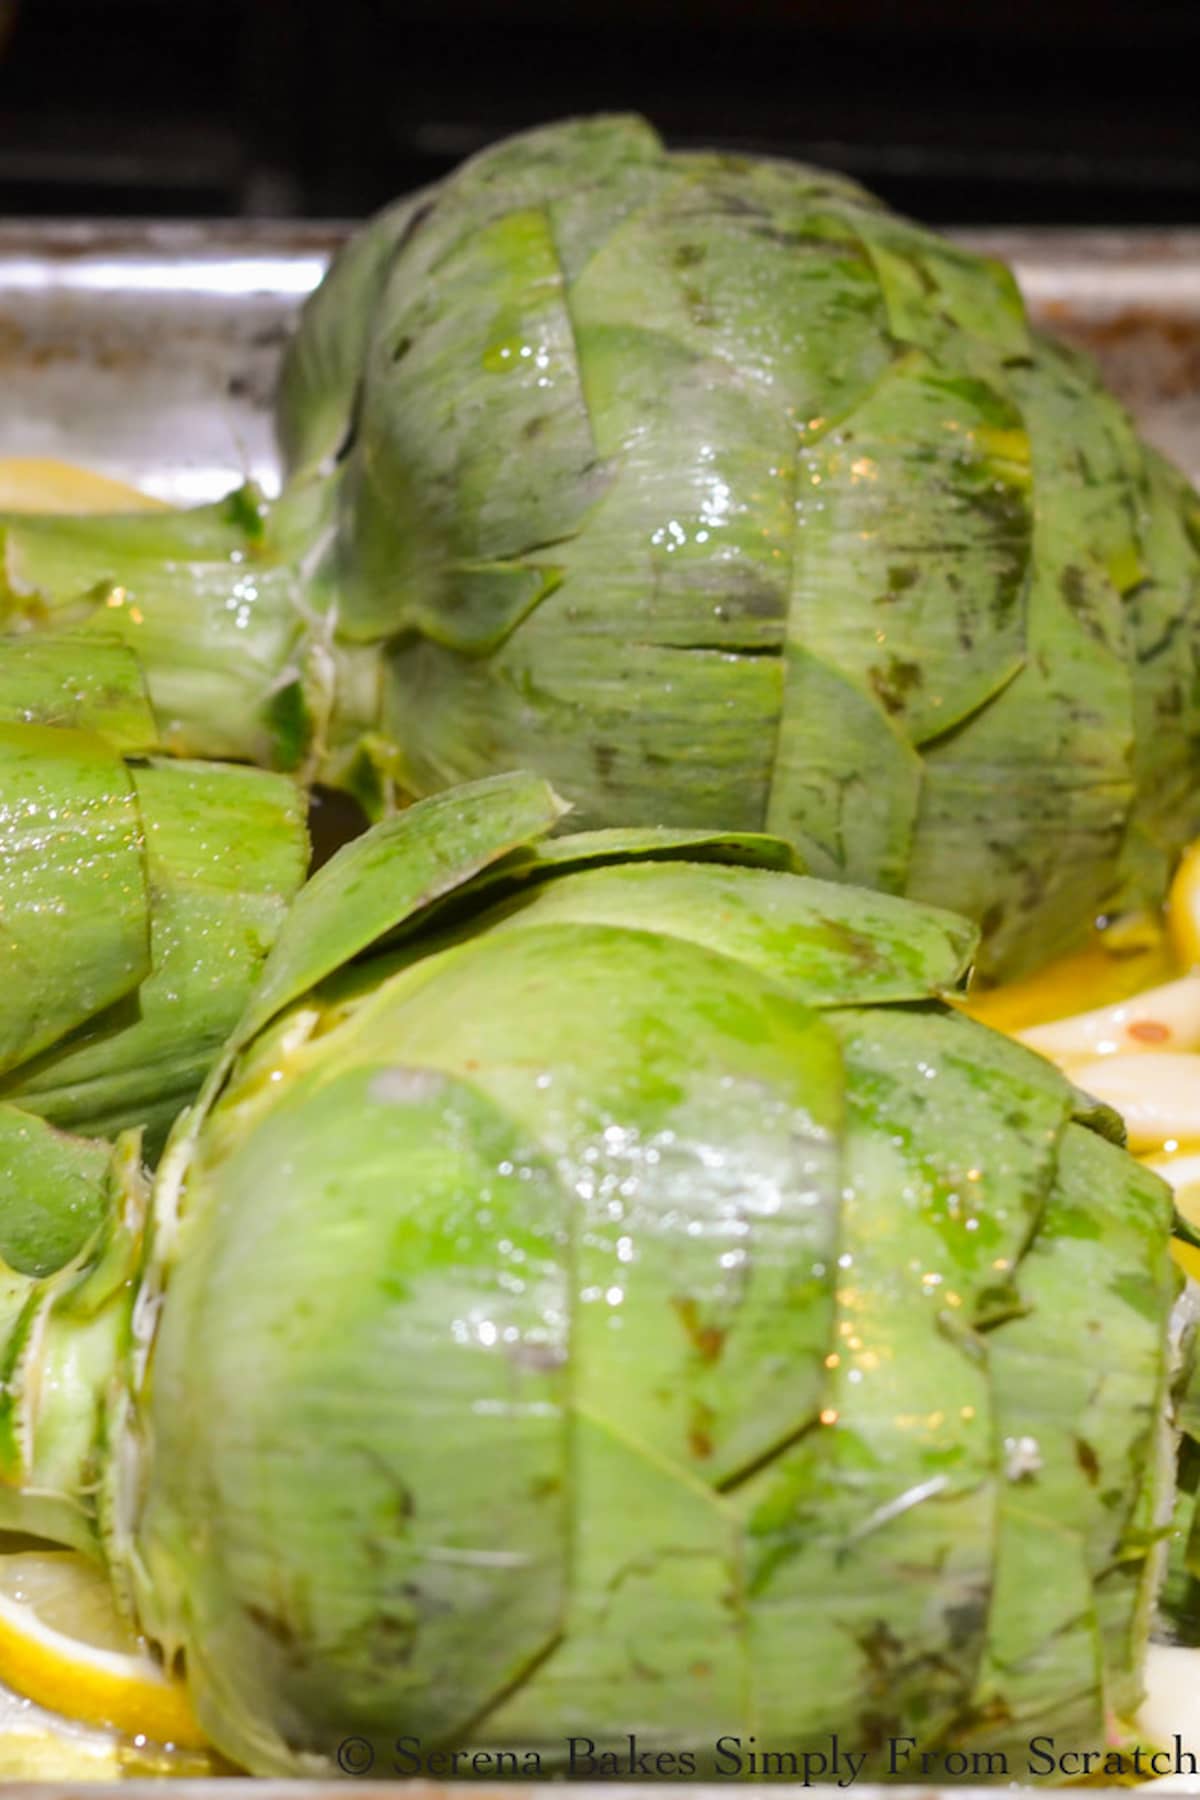 Uncooked Artichokes placed cut side down on a baking sheet drizzled with olive oil and lemon slices.